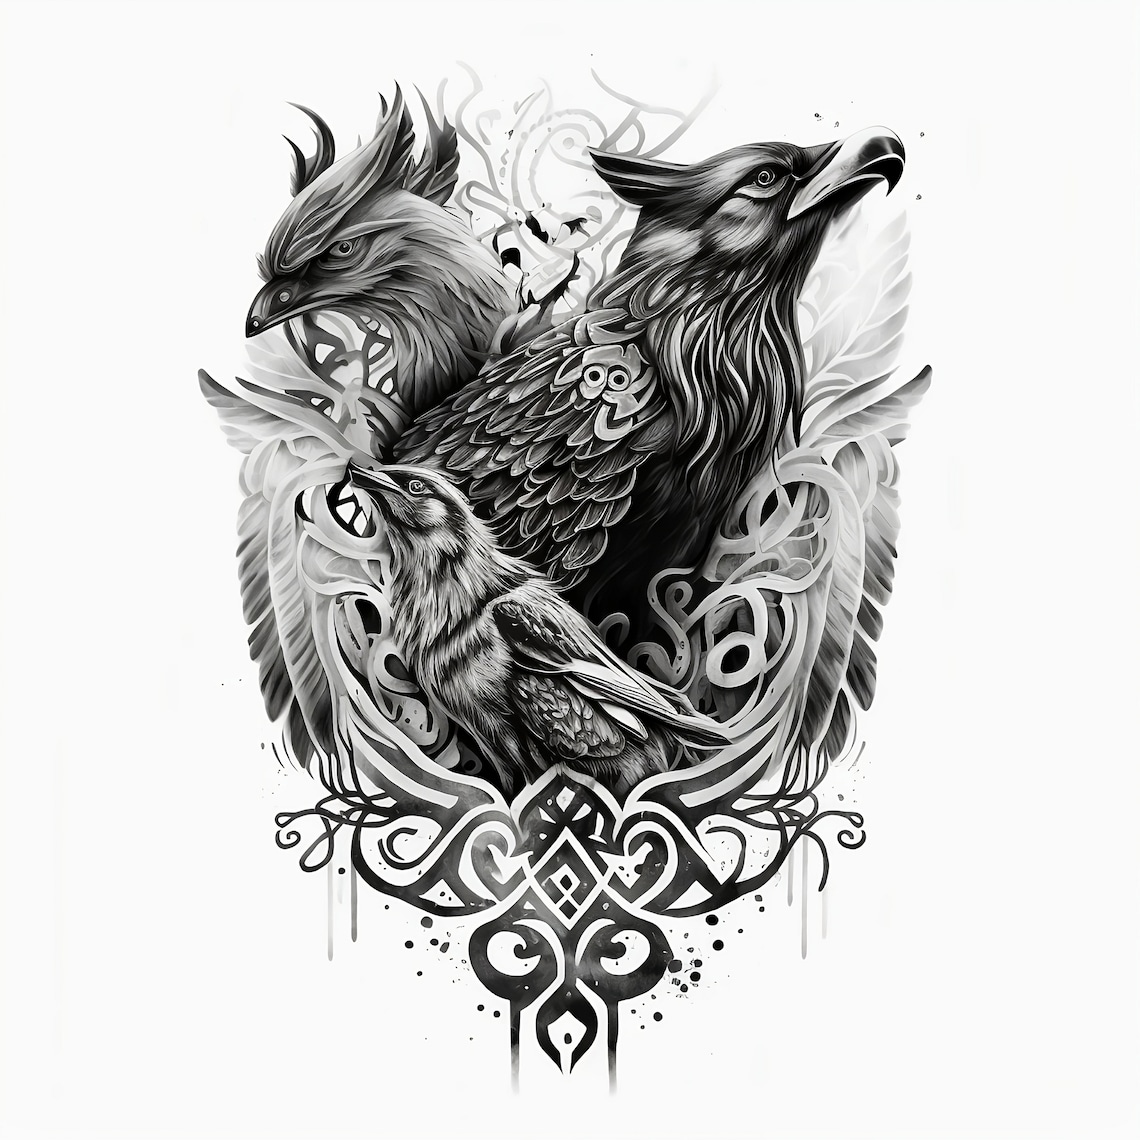 Nordic Tattoo Design White Background PNG File Download - Etsy